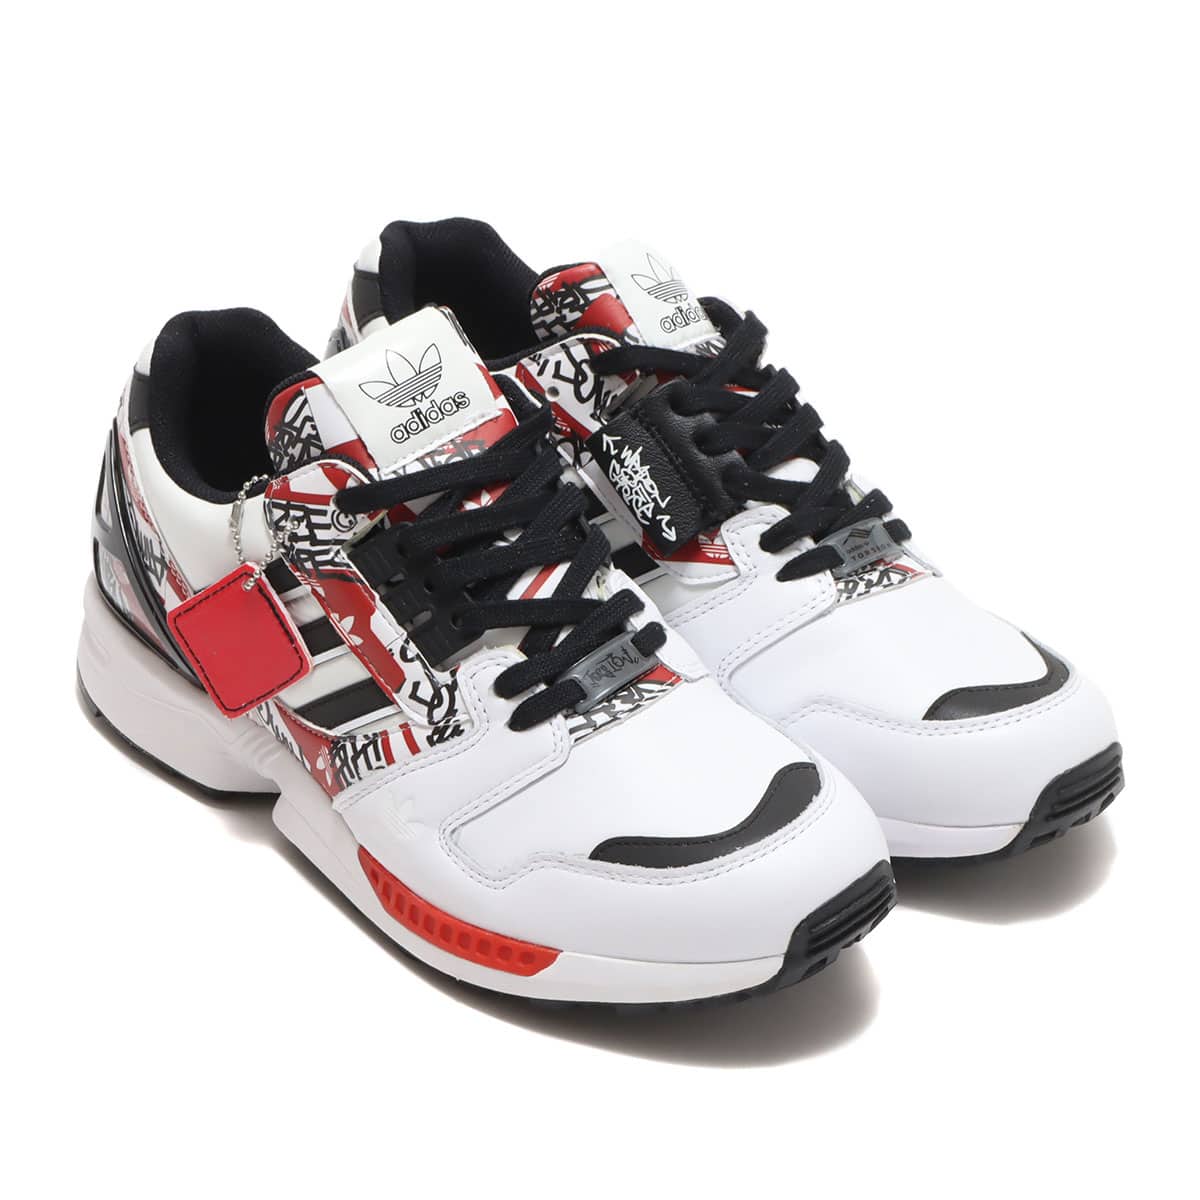 adidas ZX 8000 GRAFFITI atmos FOOTWEAR WHITE/CORE BLACK/ACTIVE RED 21FW-S_photo_large